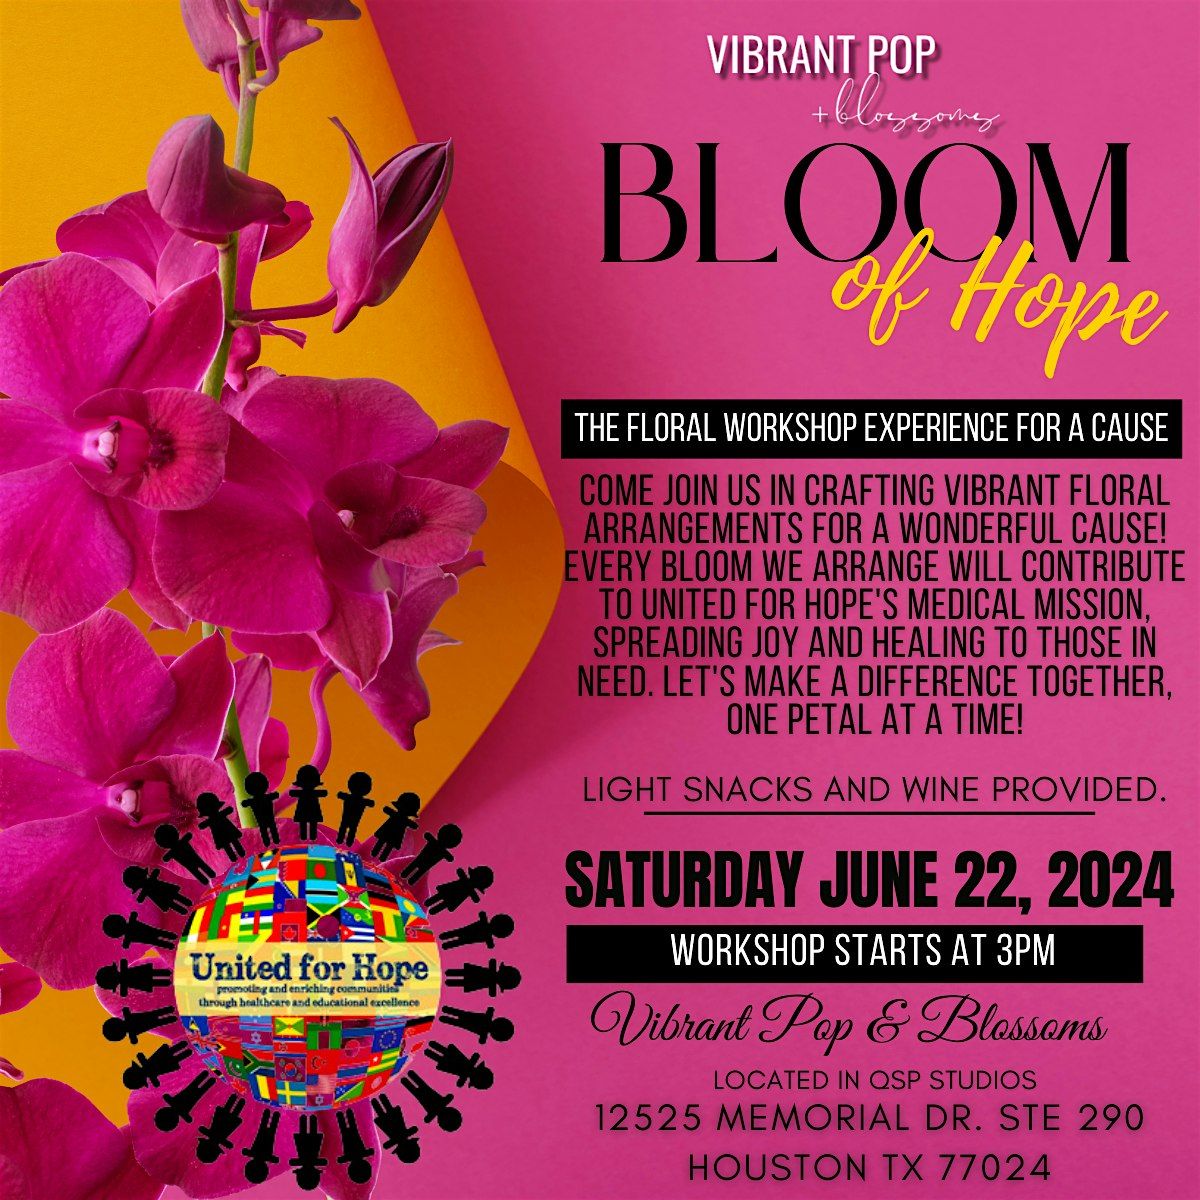 Vibrant Pop & Blossoms  *Bloom of Hope* Floral Experience Workshop